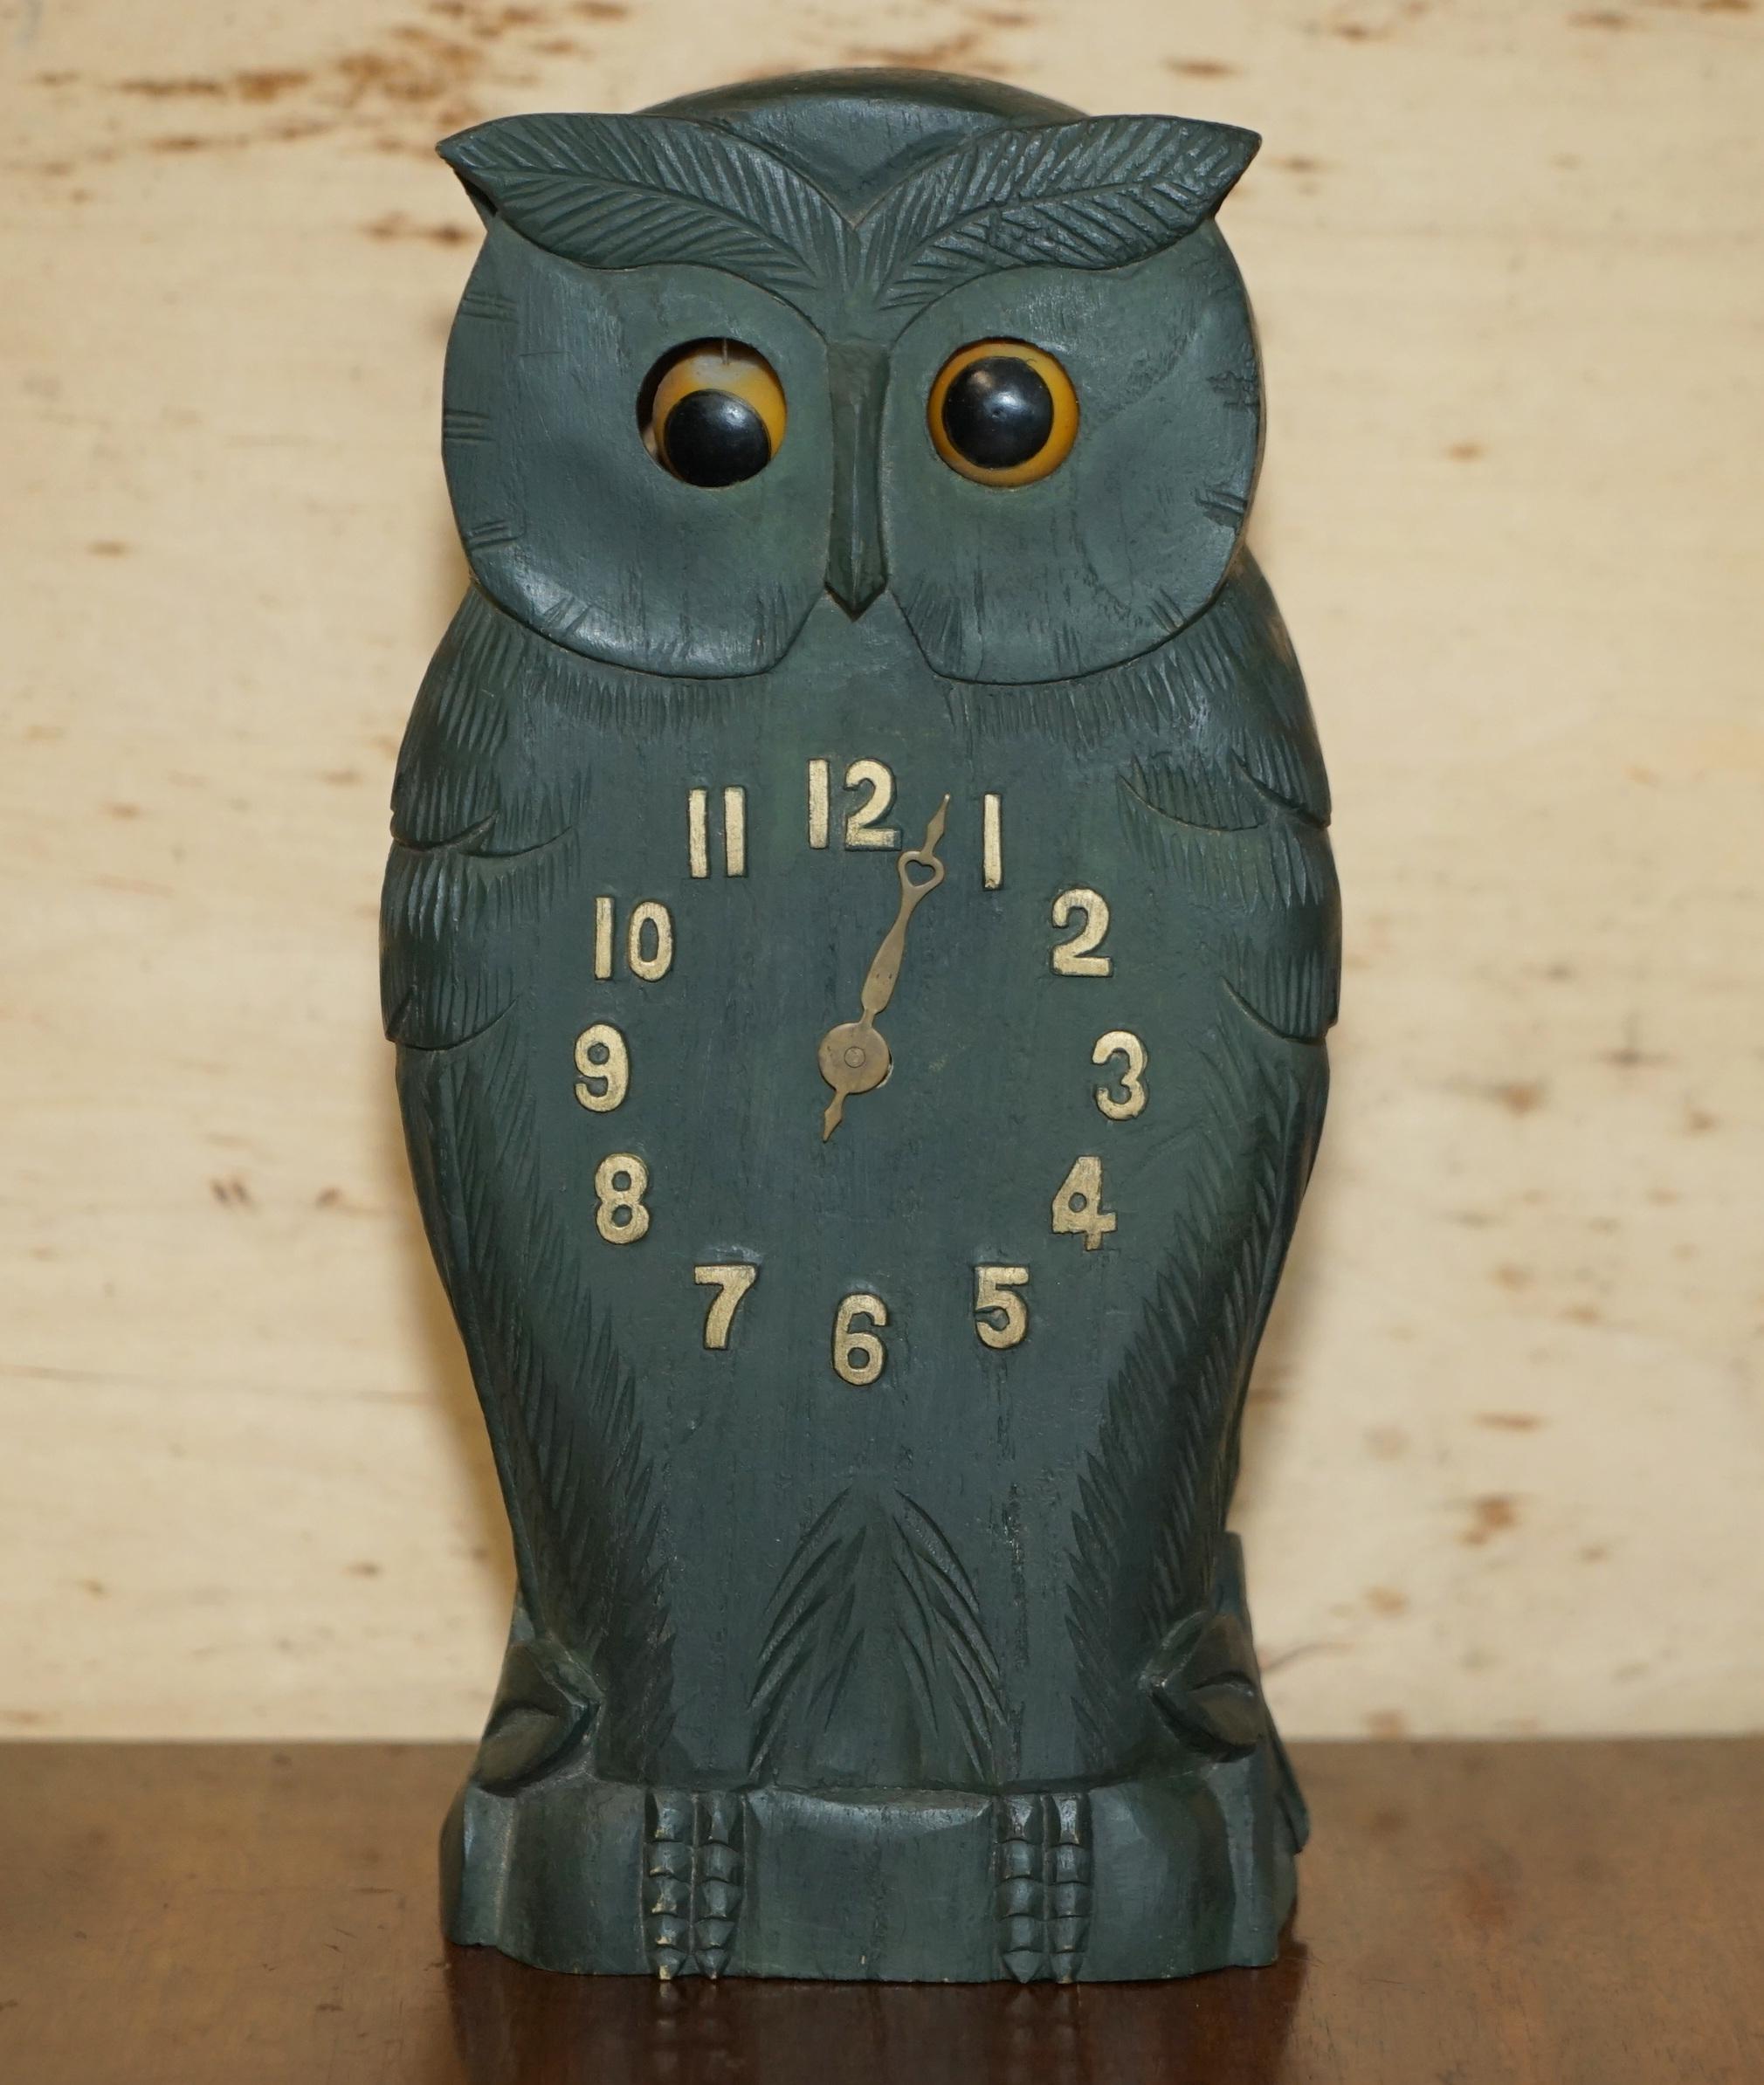 We are delighted to offer for sale this lovely original circa 1920's hand carved Owl mantle clock with moving eyes 

A very decorative and well made piece, circa 1920-1940 made in Germany

The condition is period and unrestored, it has the